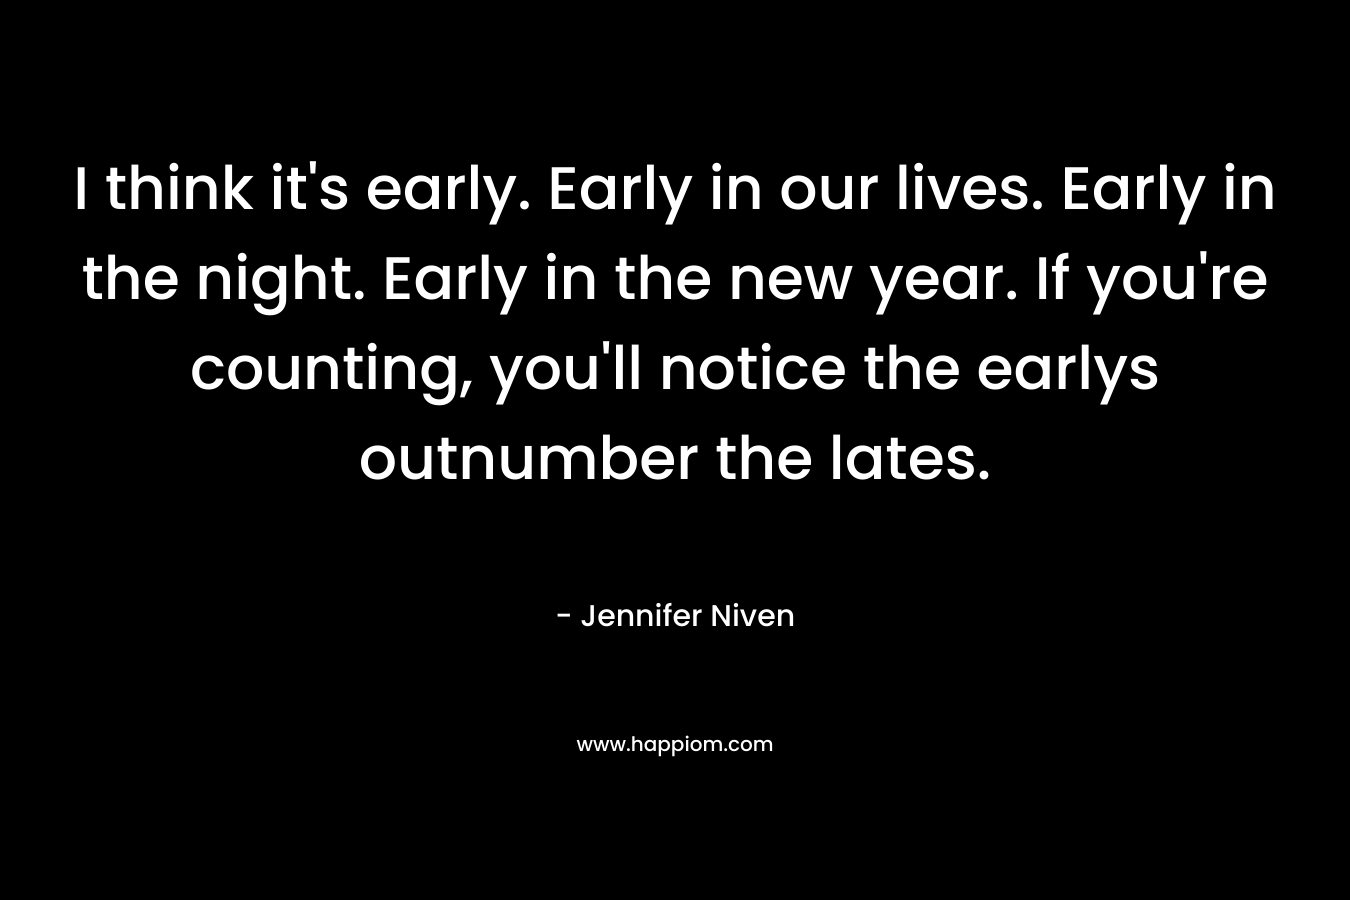 I think it’s early. Early in our lives. Early in the night. Early in the new year. If you’re counting, you’ll notice the earlys outnumber the lates. – Jennifer Niven